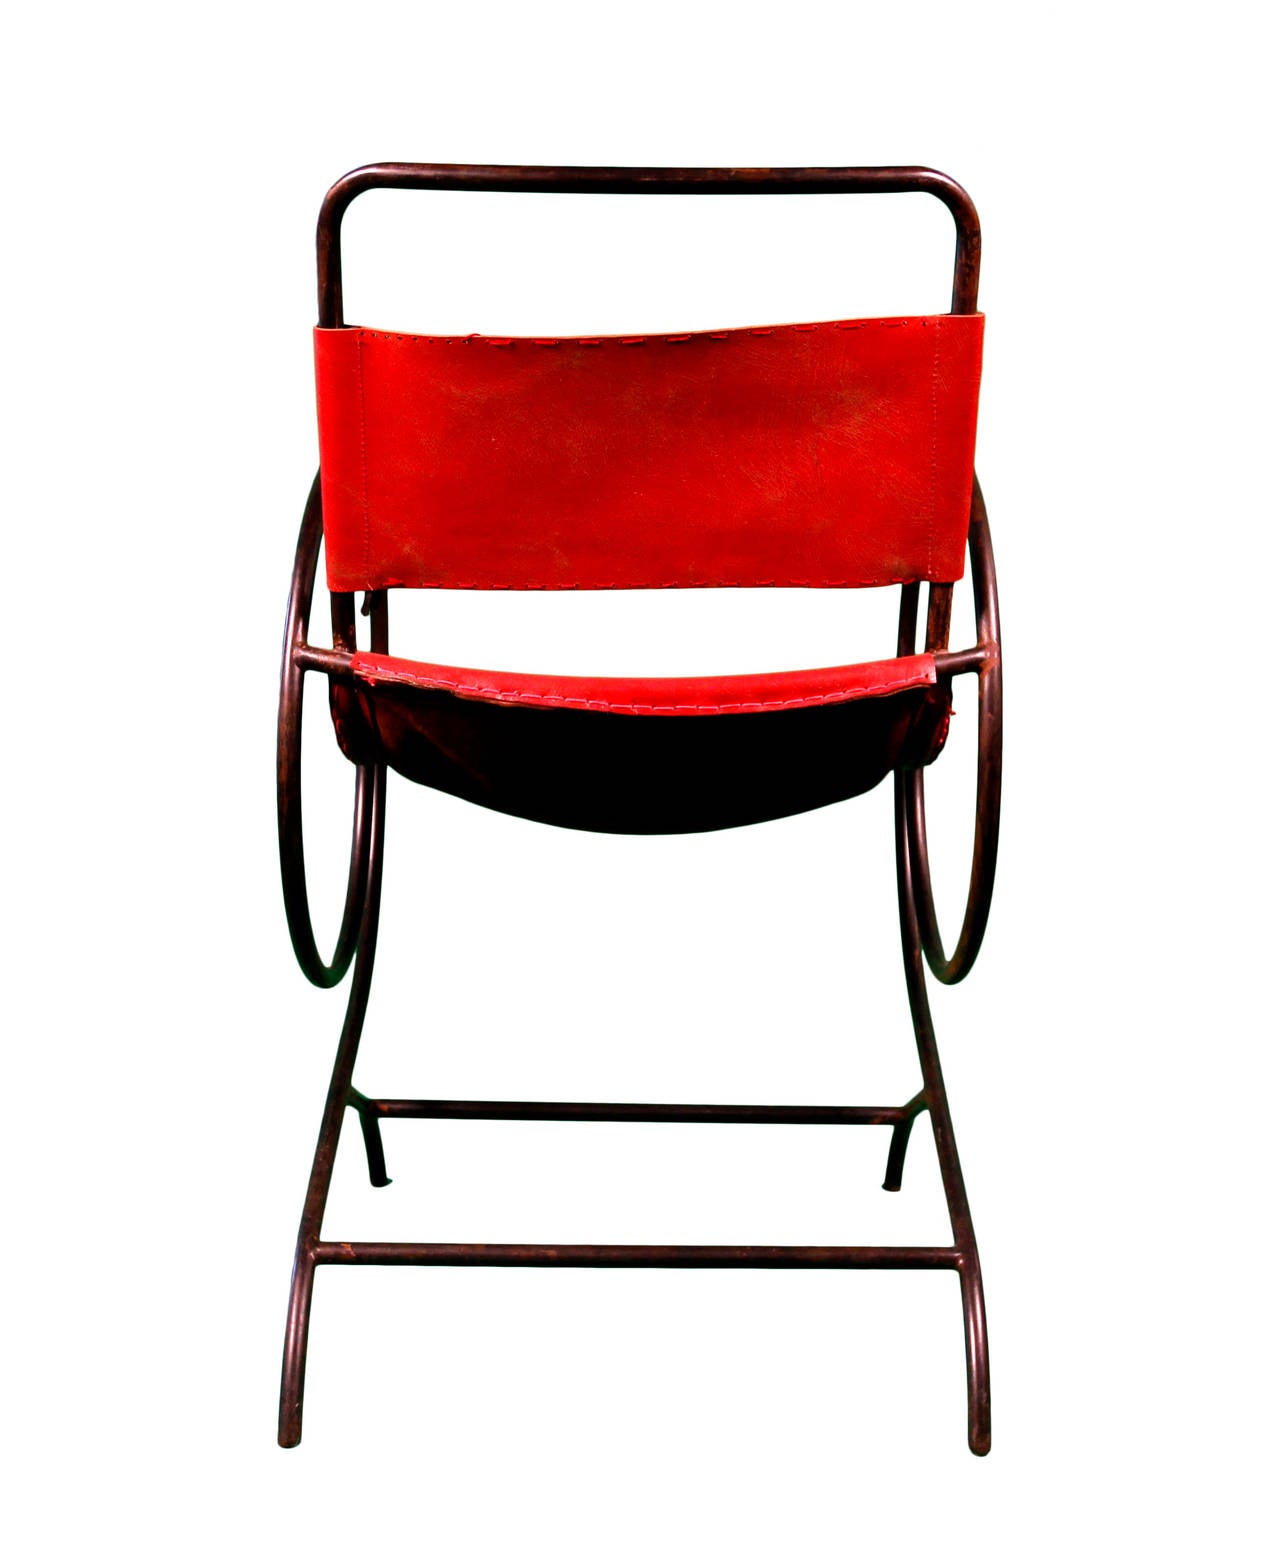 These are a whimsical set of two curbed metal chairs. The chairs are upholstered in a perfectly distressed red cowhide leather which is incredibly stylish and comfortable. 

These chairs can be completely customized so if you think they'd be